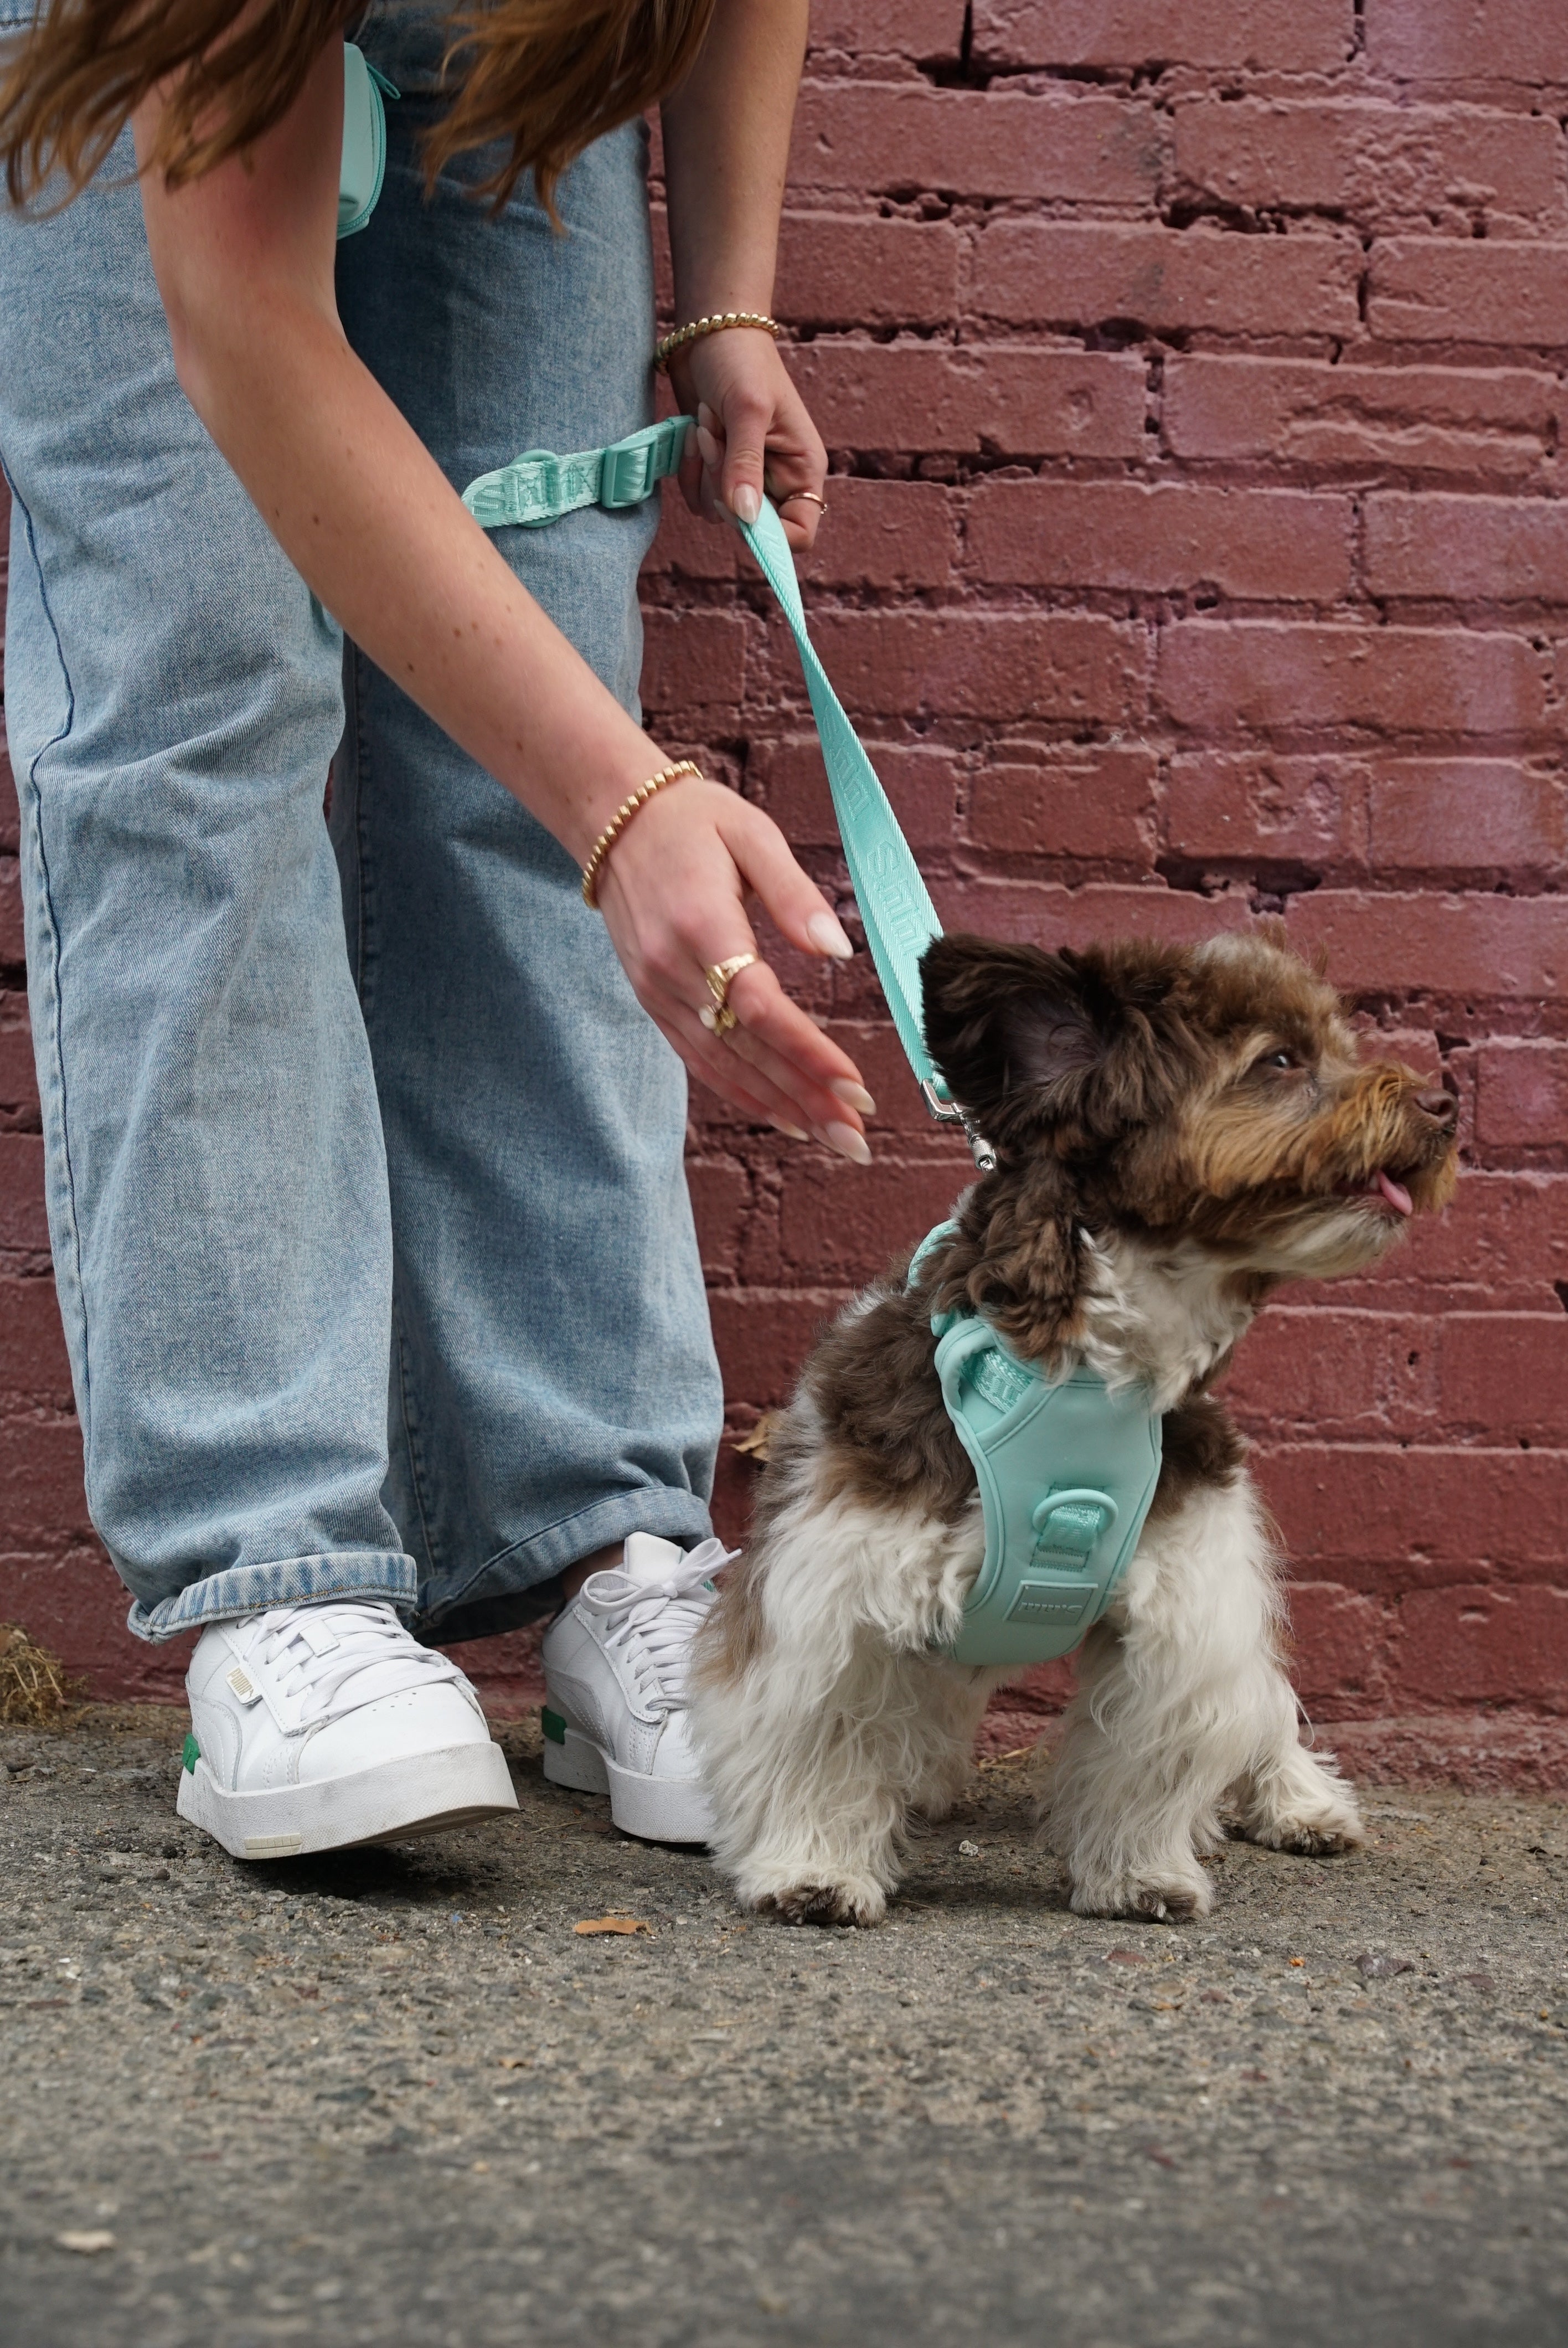 a small, fluffy dog with a curly brown and white coat wearing a Cali Blue harness and leash from Lulu's brand. The dog is standing on a concrete sidewalk in front of a red brick wall, facing to the right with its tongue out. A person, dressed in light blue jeans and white sneakers, is bending down and holding the leash, guiding the dog gently by the harness. The scene conveys a sense of gentle control and interaction between the person and the dog